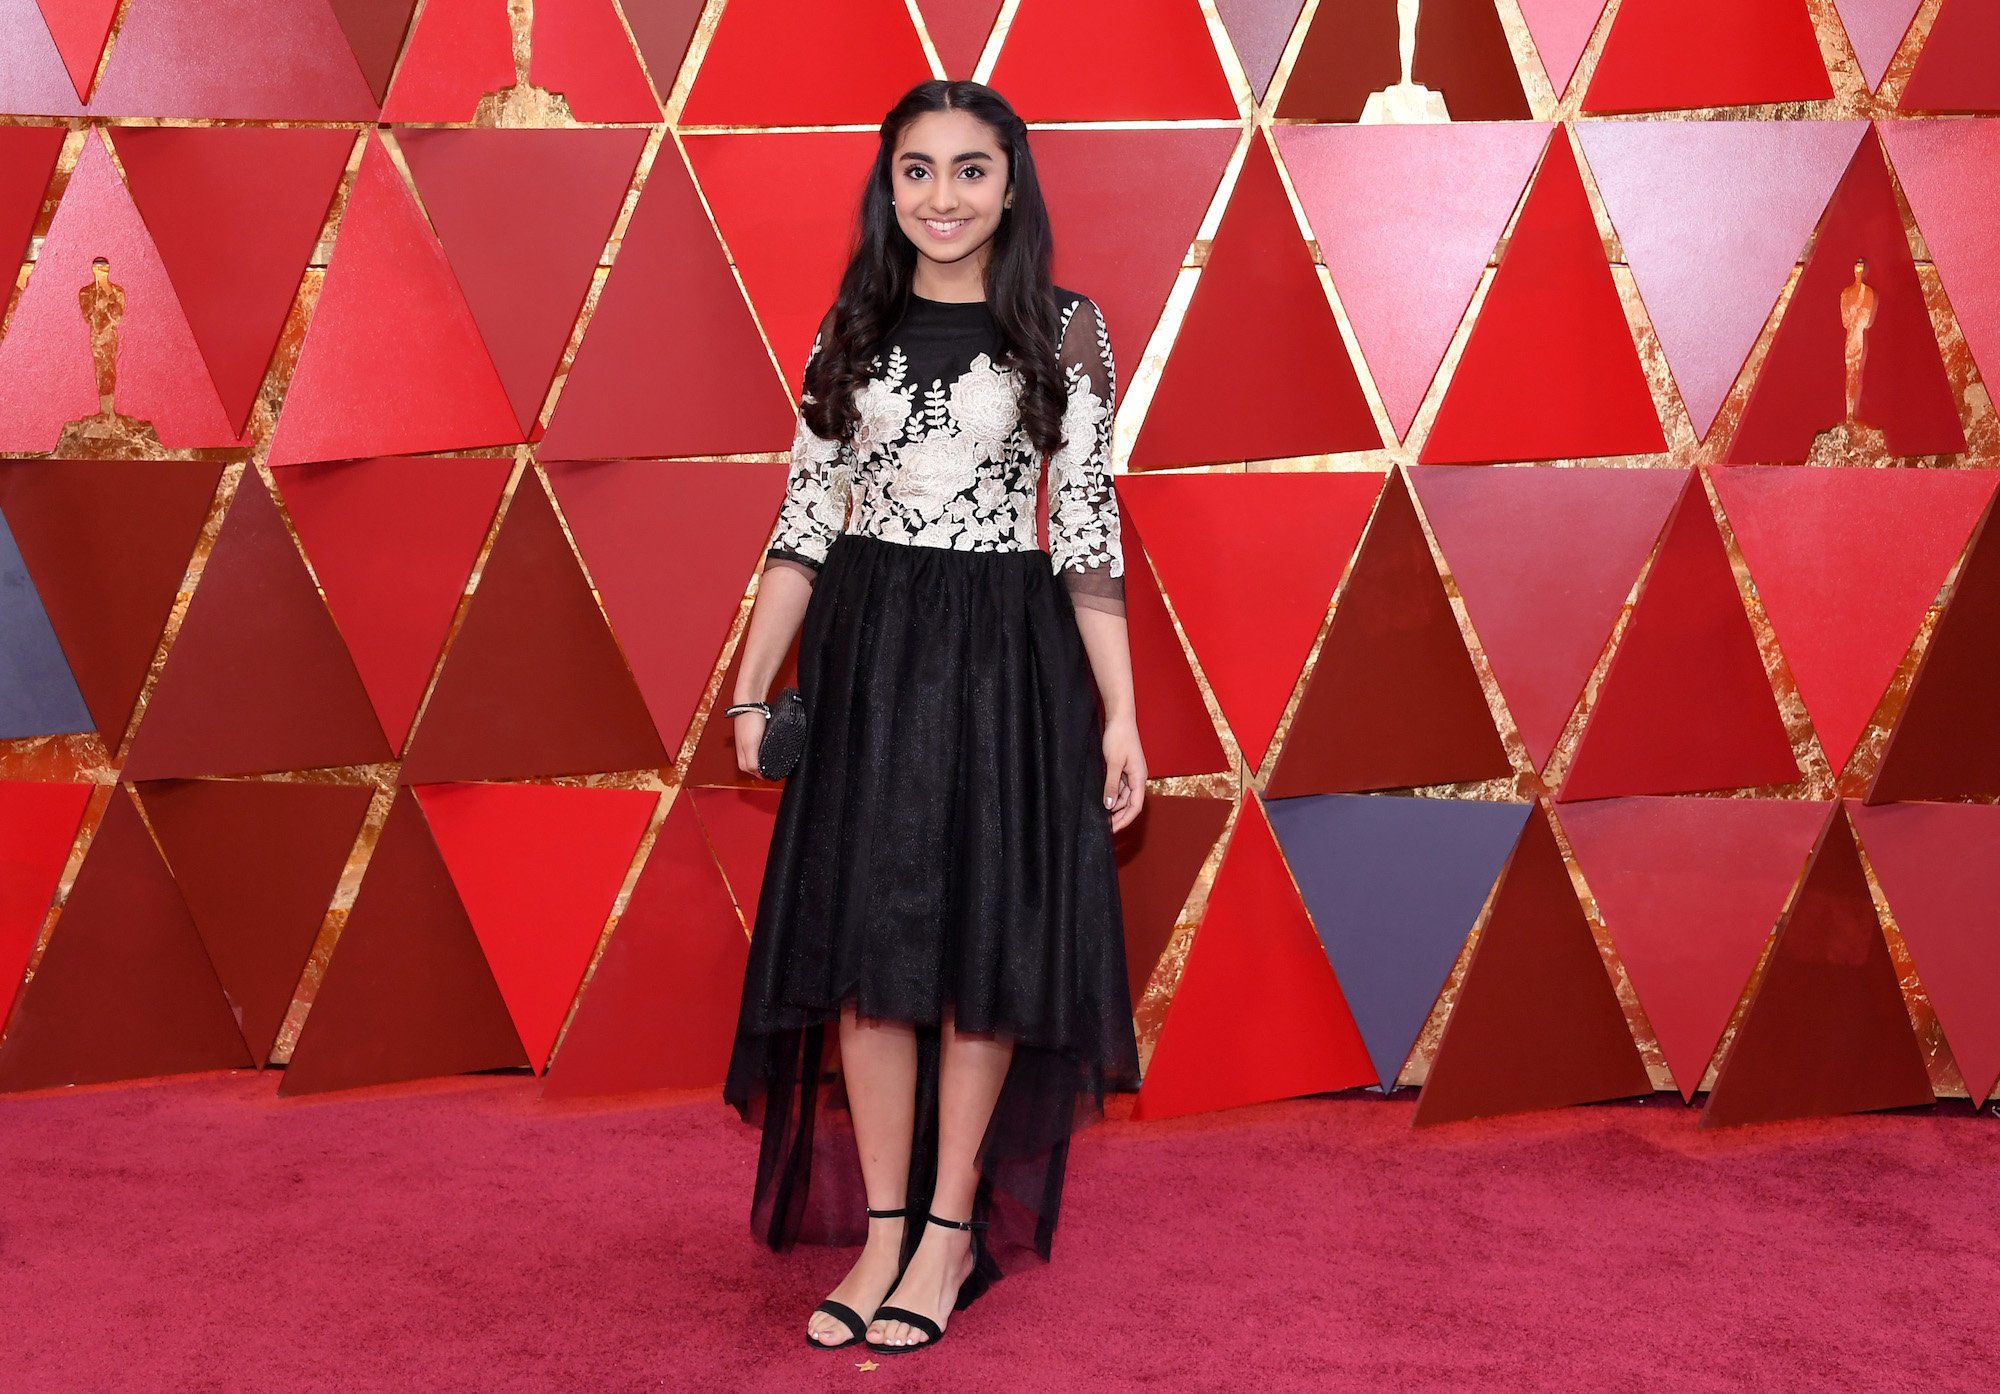 Saara Chaudry smiling on the red carpet in front of a red wall